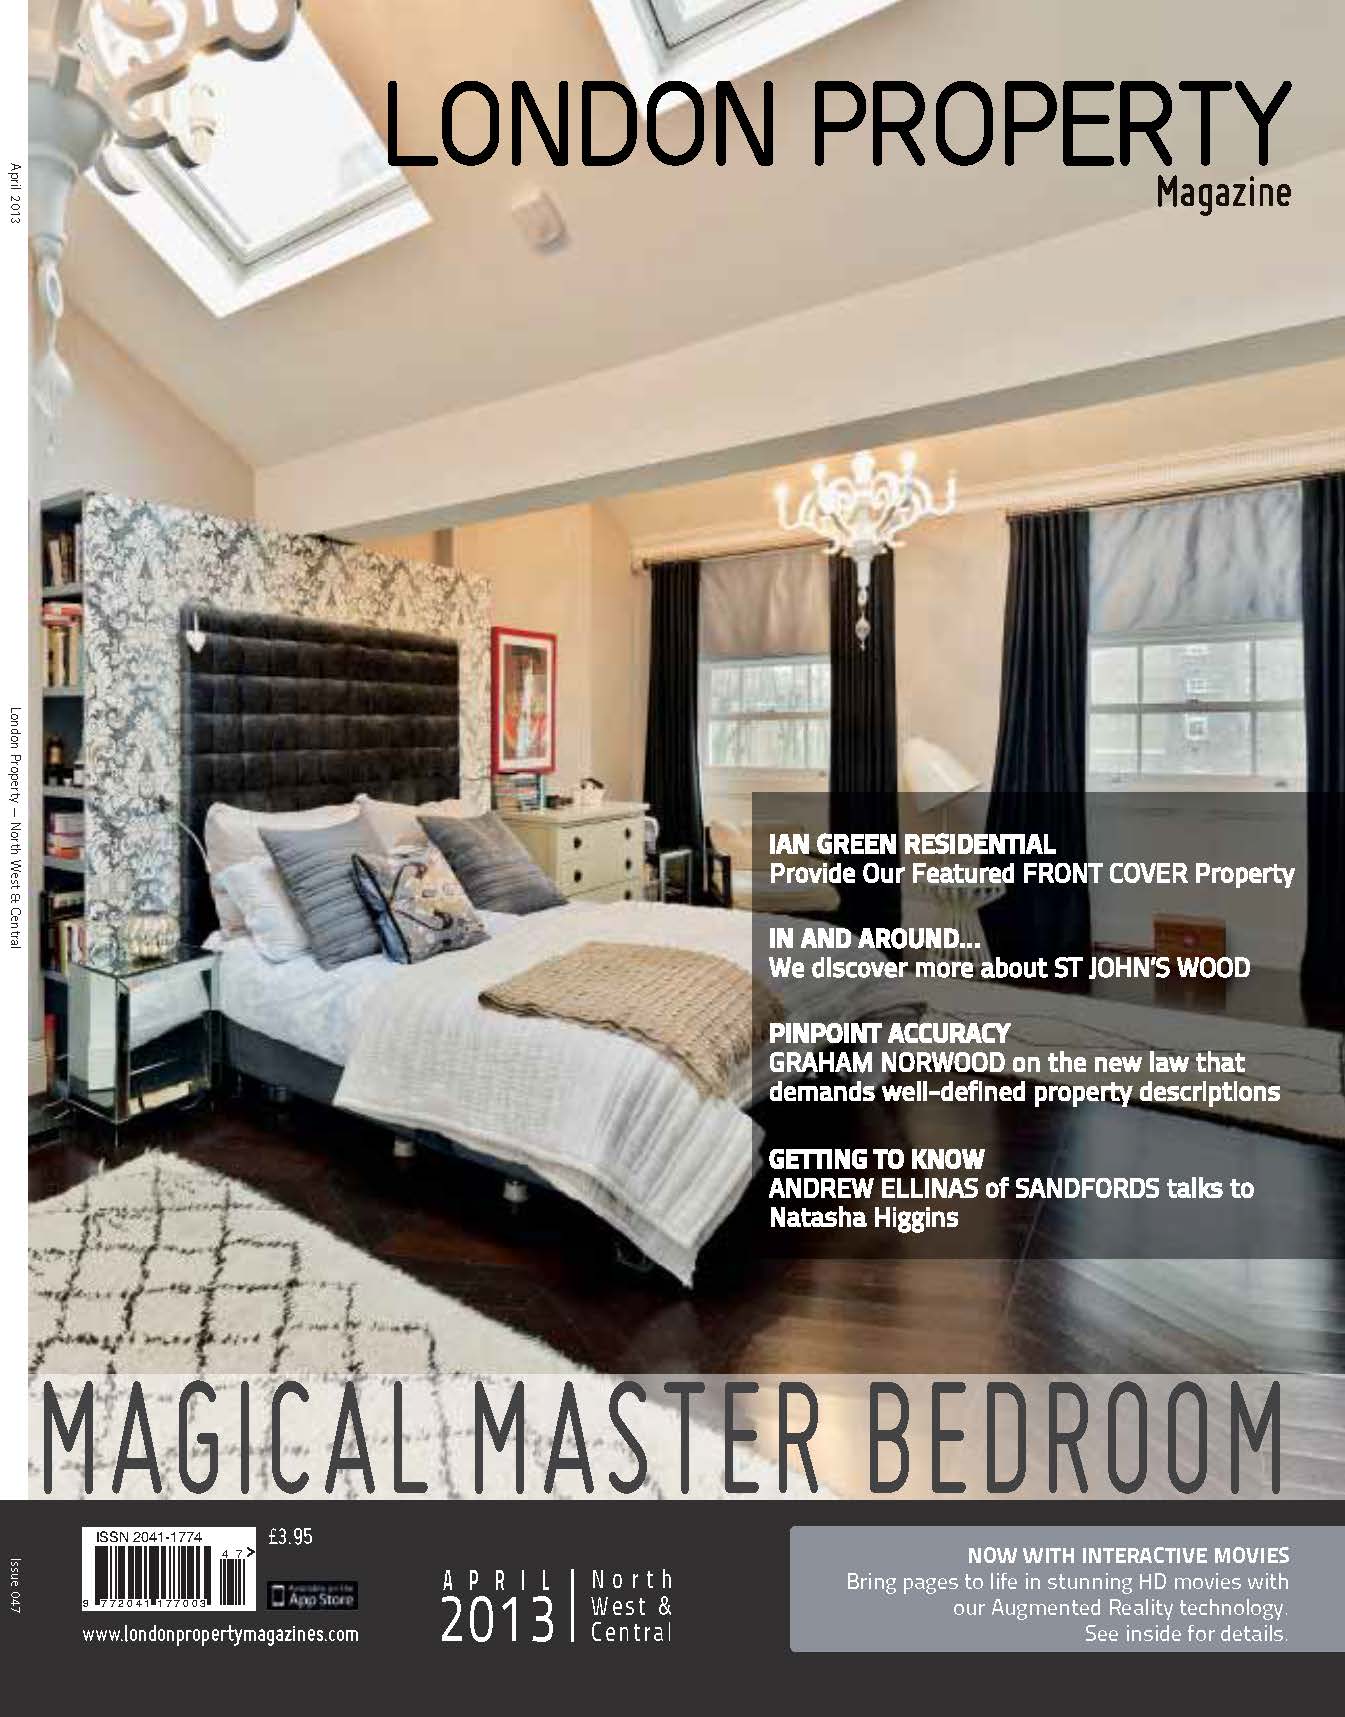 IanGreen-media-LONDON-PROPERTY-COVER-MARCH-2013